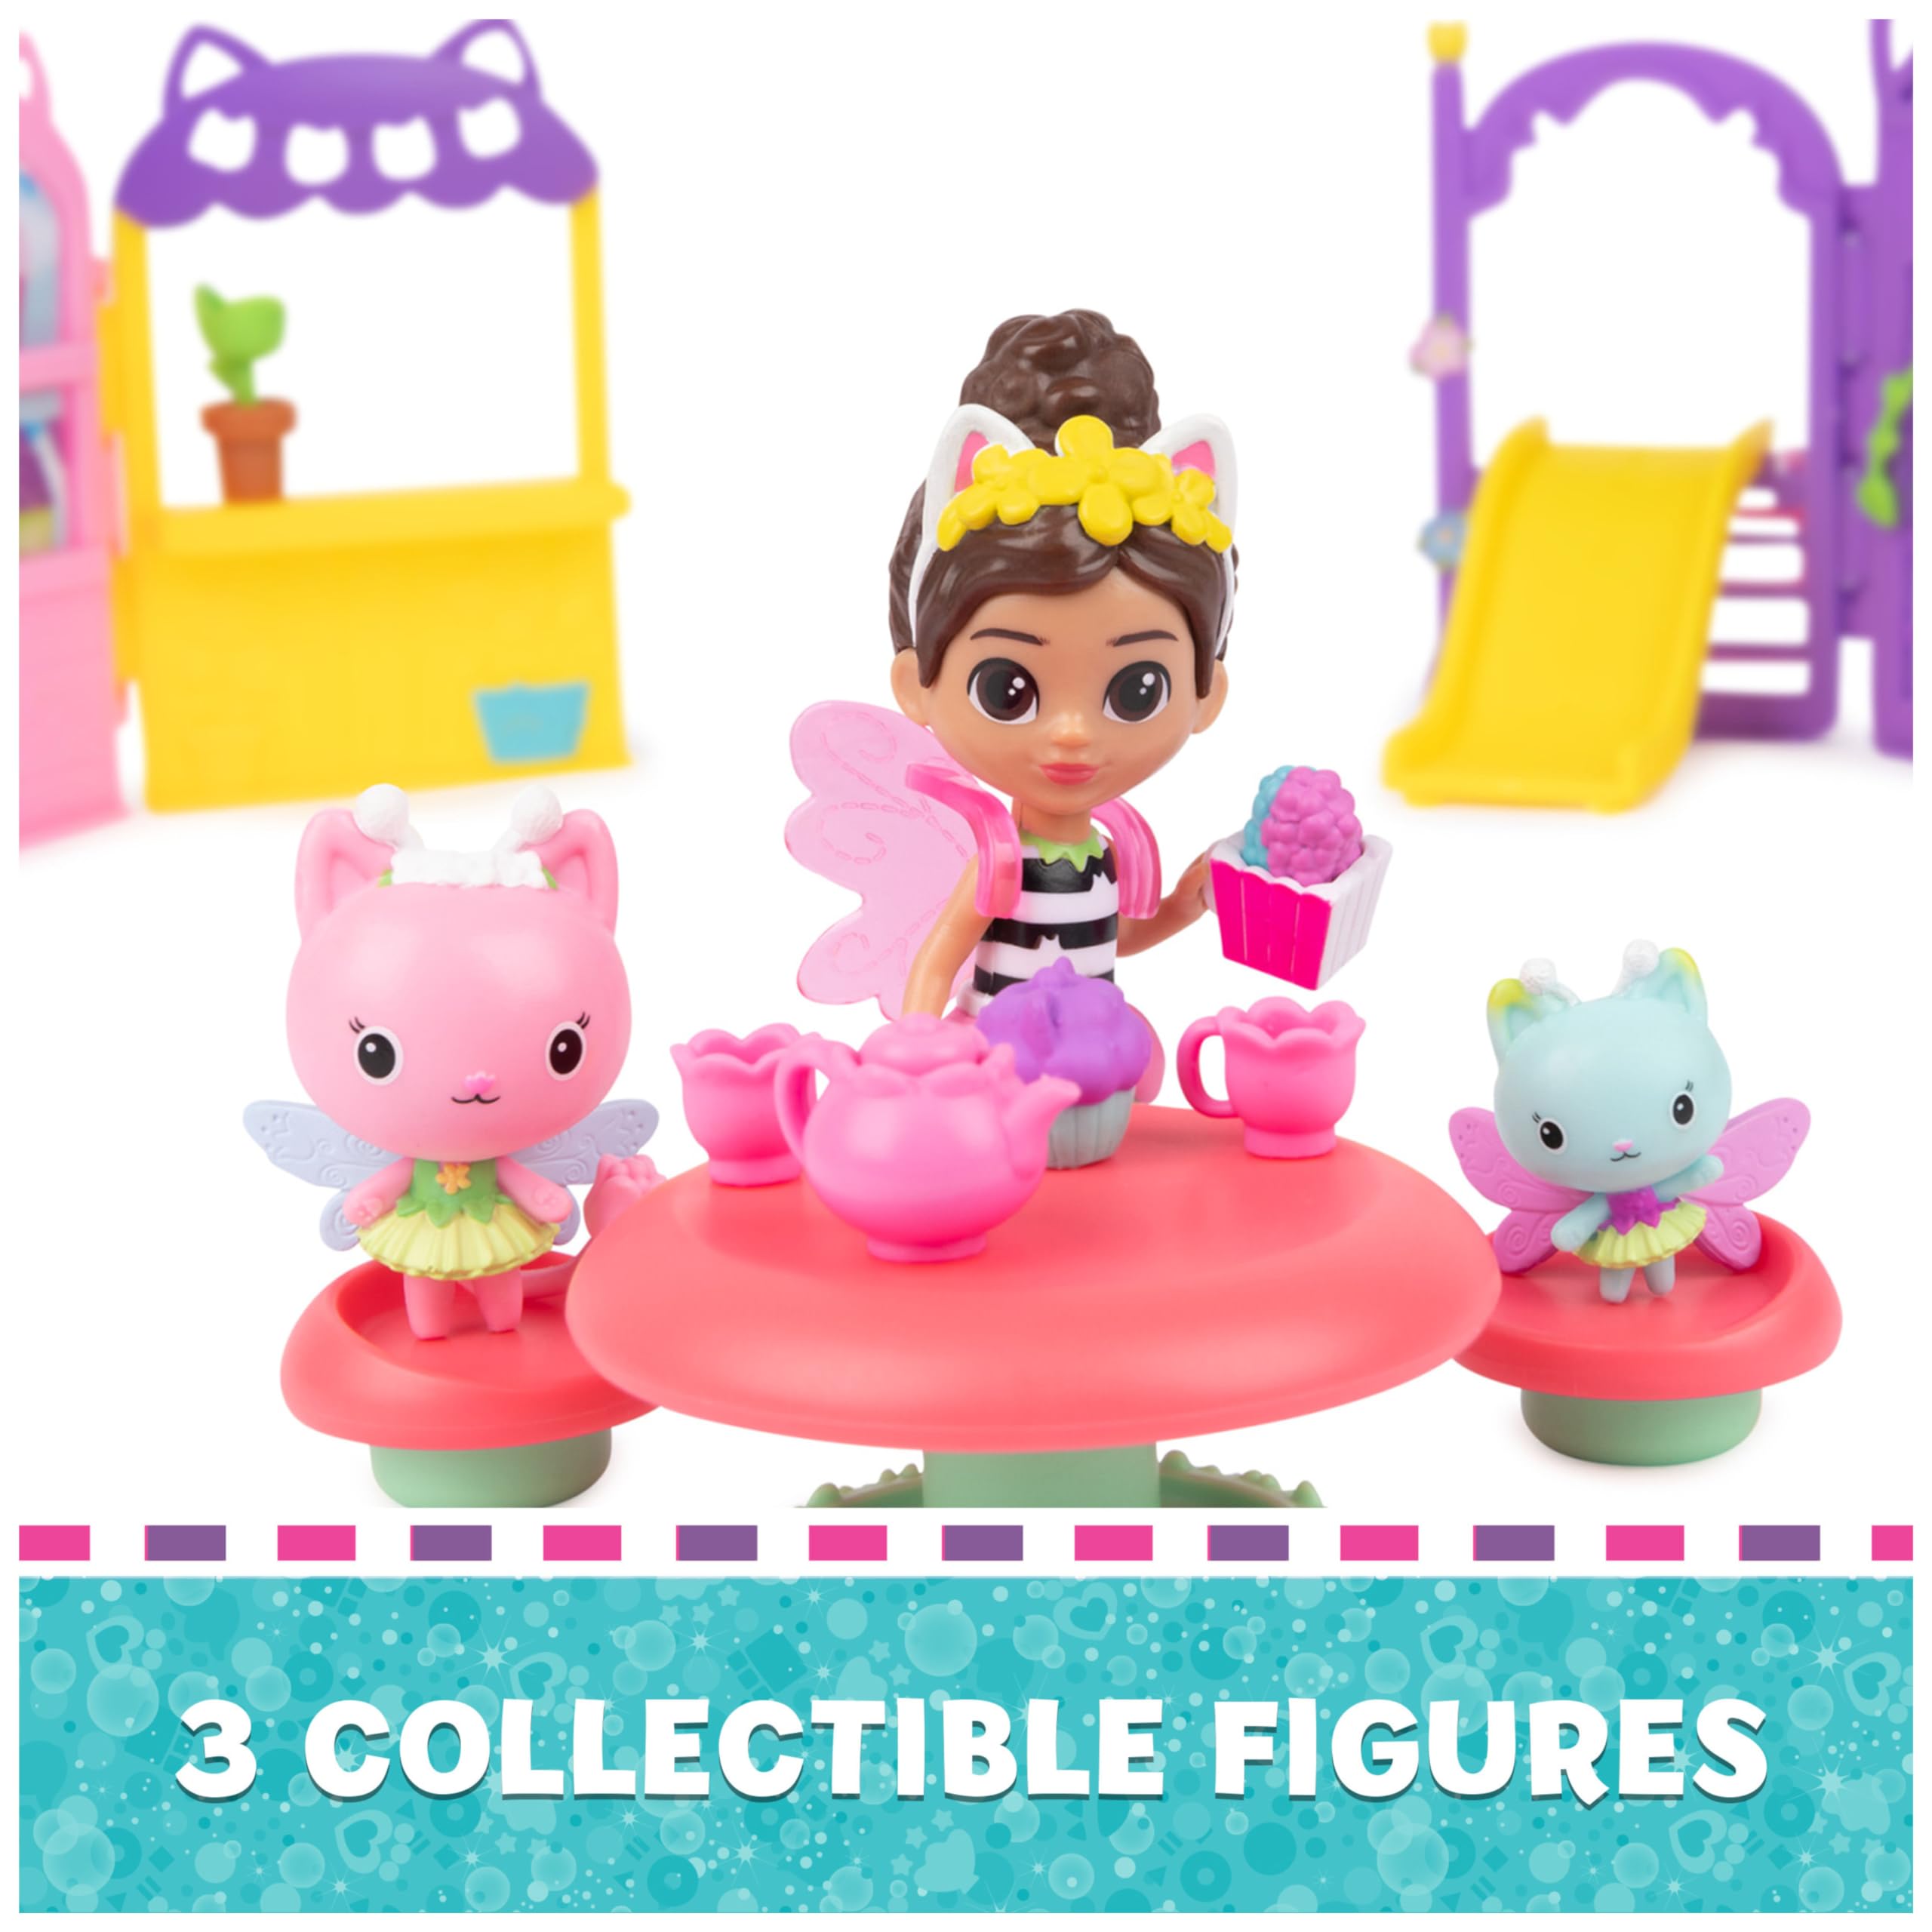 Gabby's Dollhouse, Kitty Fairy Garden Party, 18-Piece Playset with 3 Toy Figures, Surprise Toys & Dollhouse Accessories, Kids Toys for Girls & Boys 3+